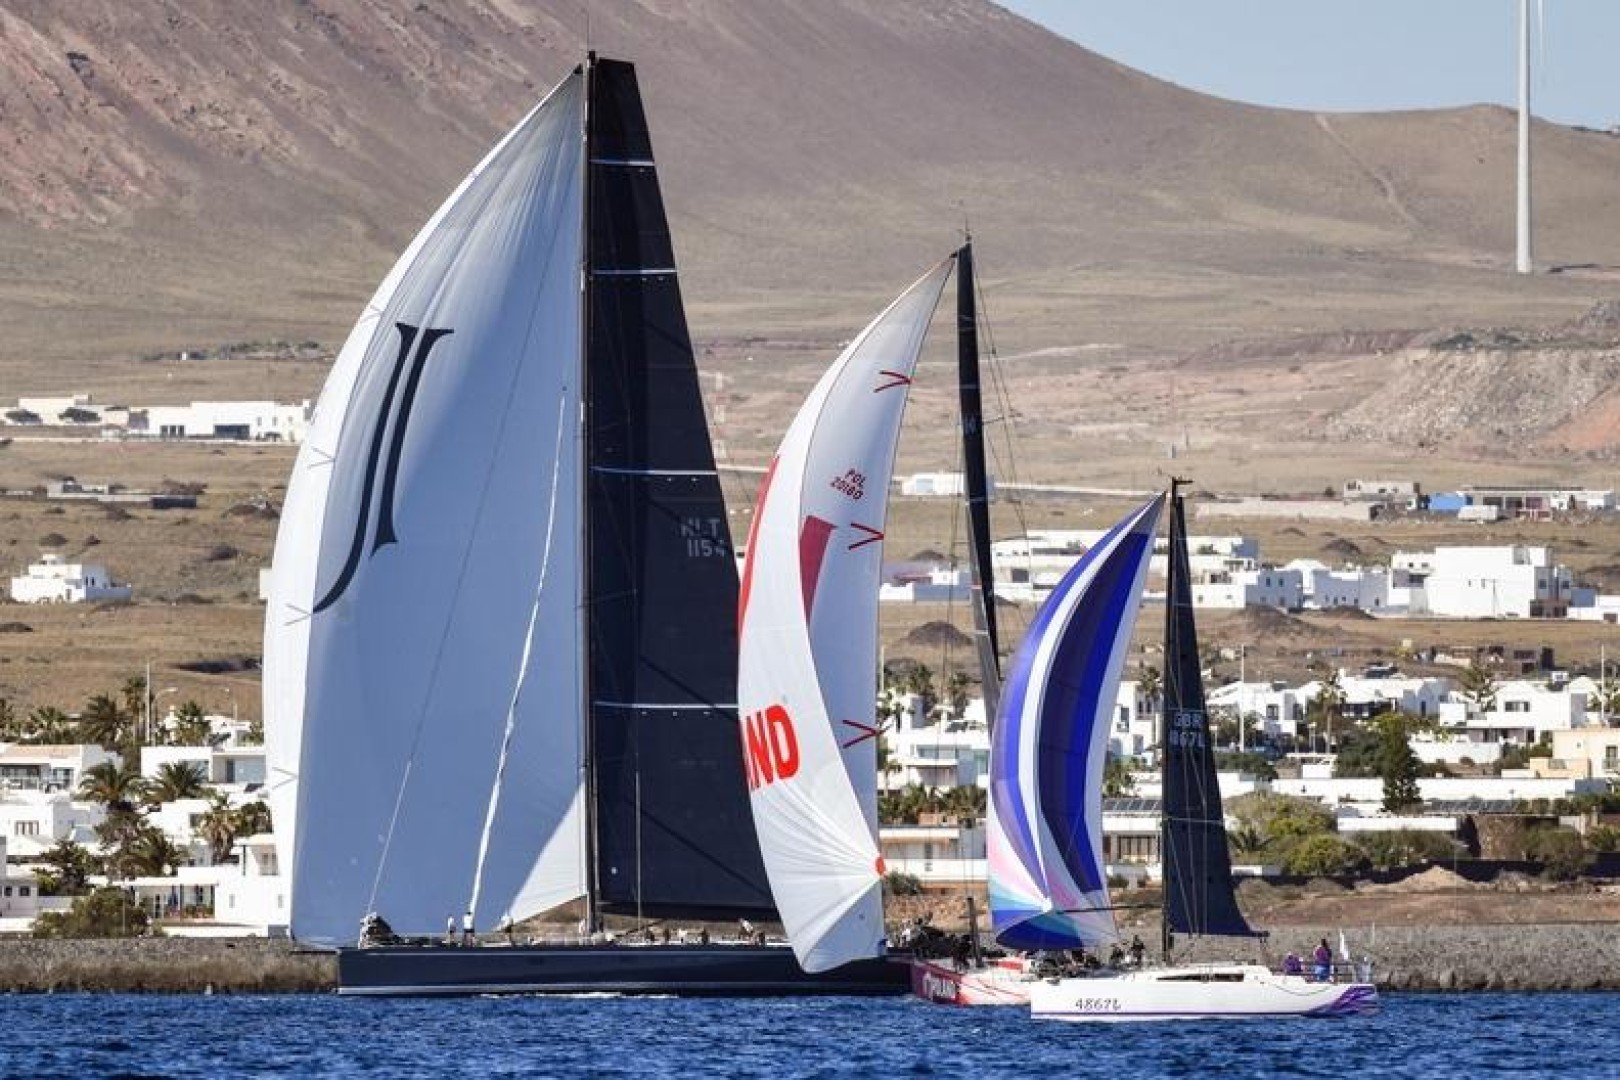 A spectacular start for the diverse fleet in the 2023 RORC Transatlantic Race which set off from Arrecife, Lanzarote in the 9th edition of the 3,000 mile race to Grenada